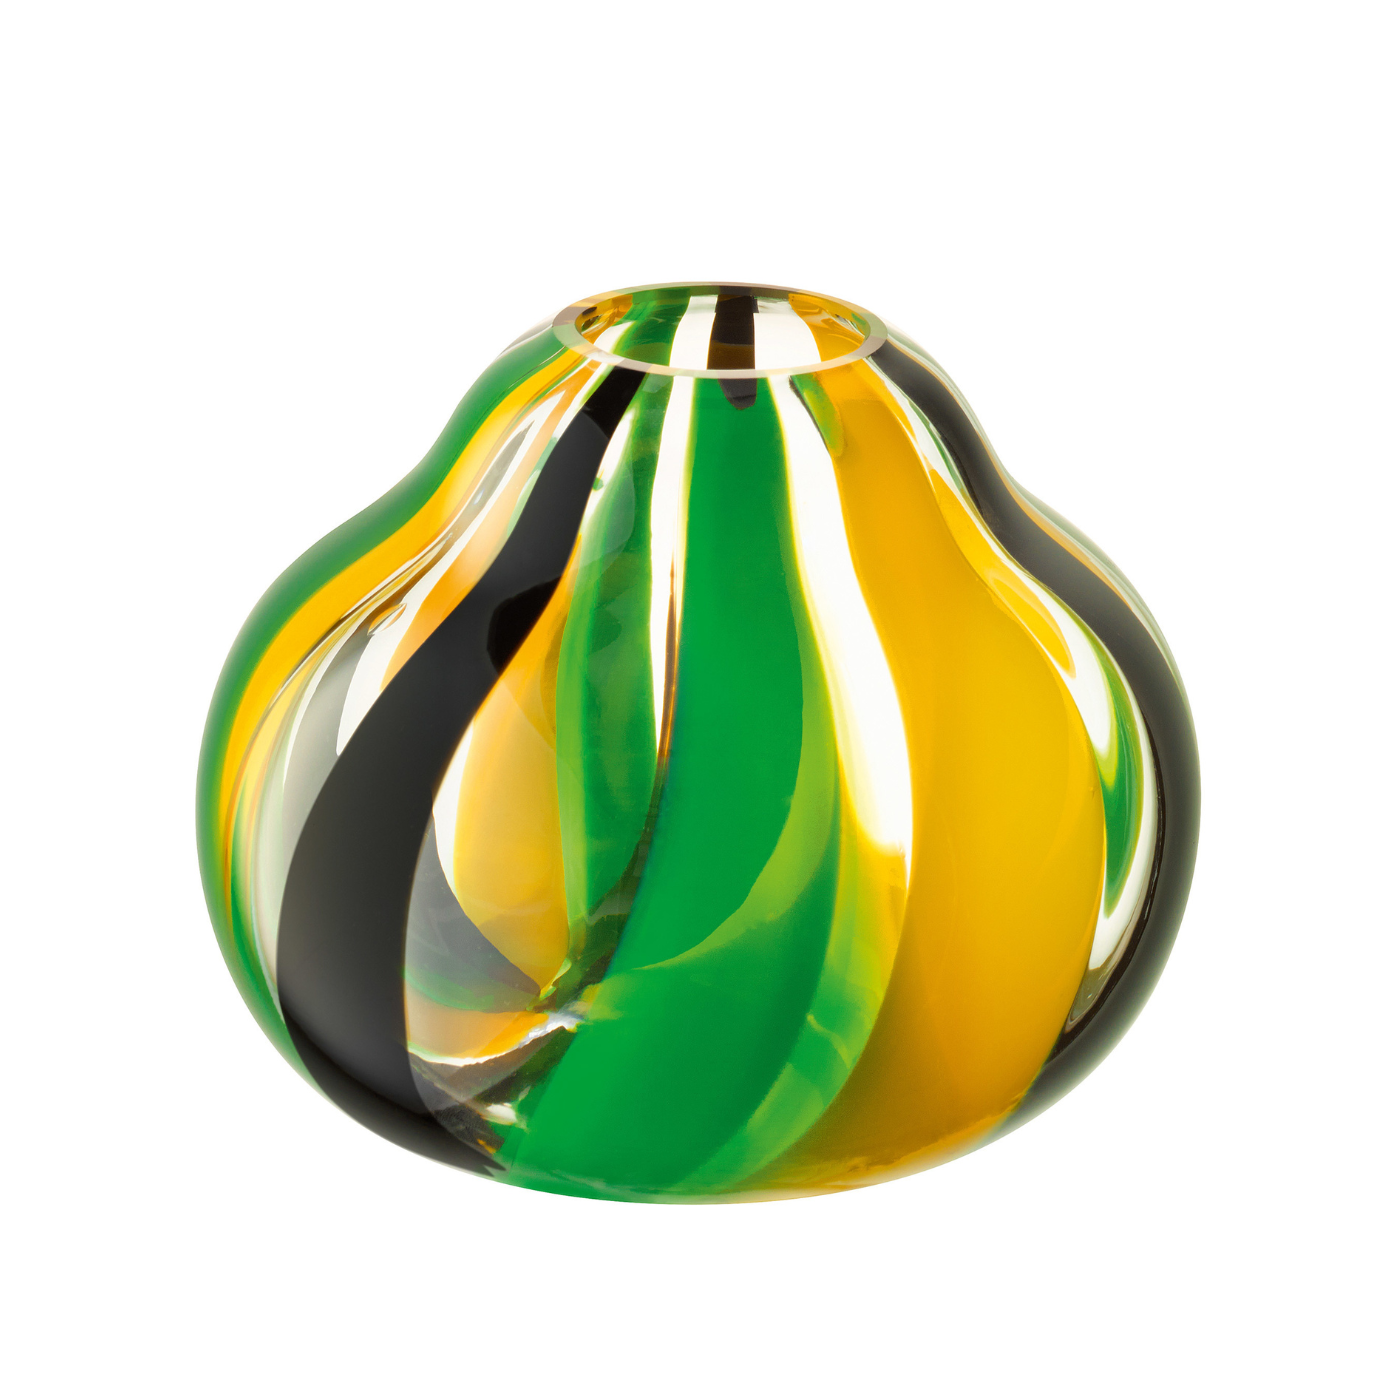 A bulb shaped vase featuring a green, yellow and black stripe design.